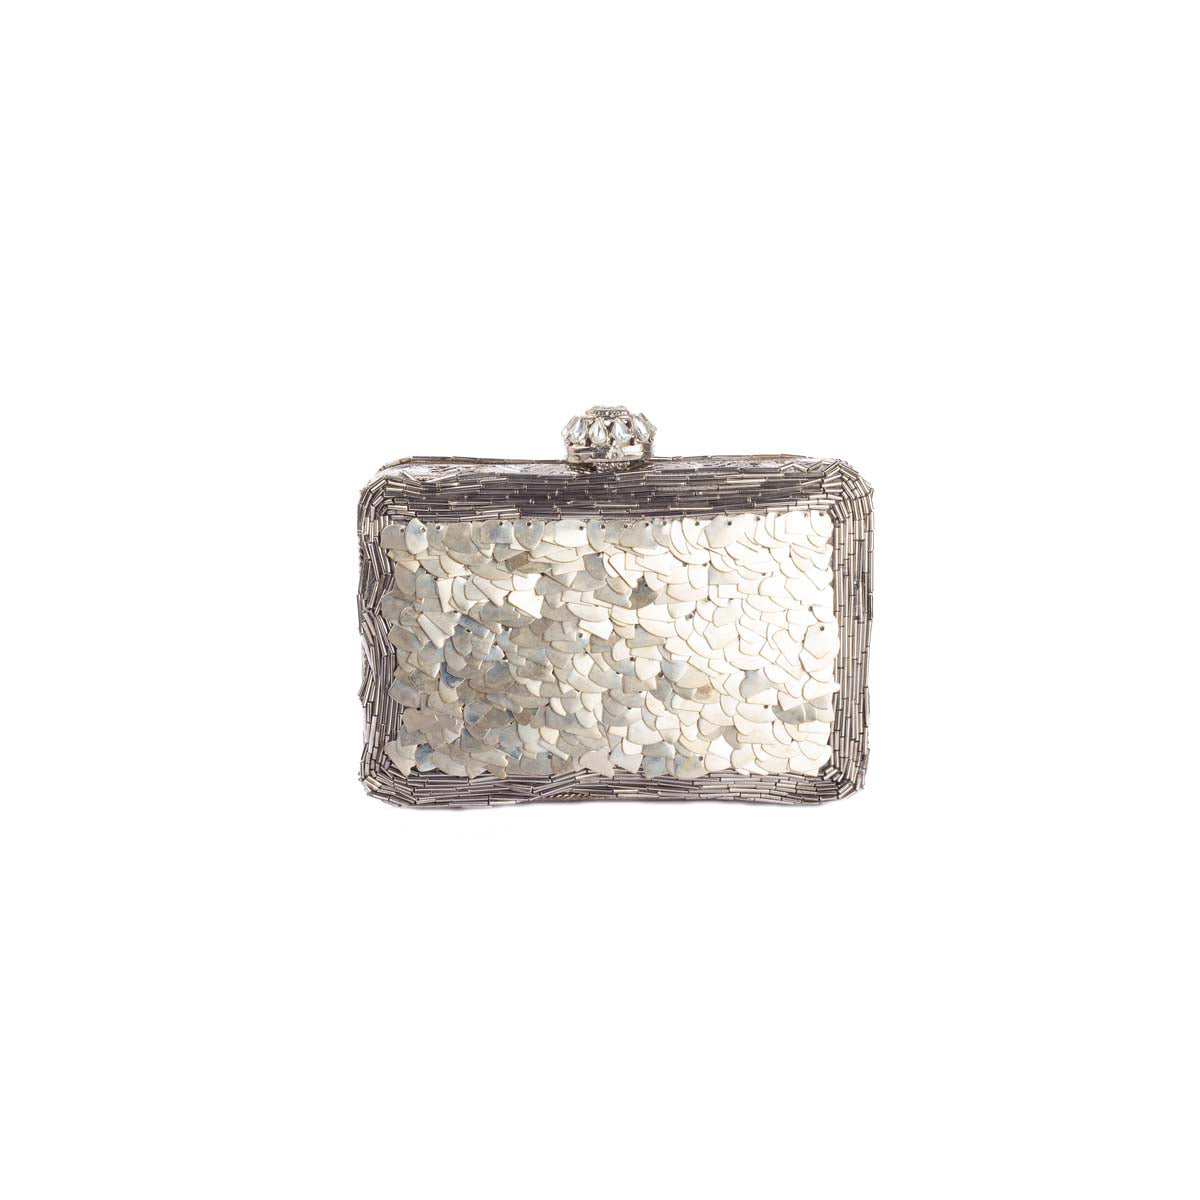 Silver Metal Clutch With Pink Moon Rock